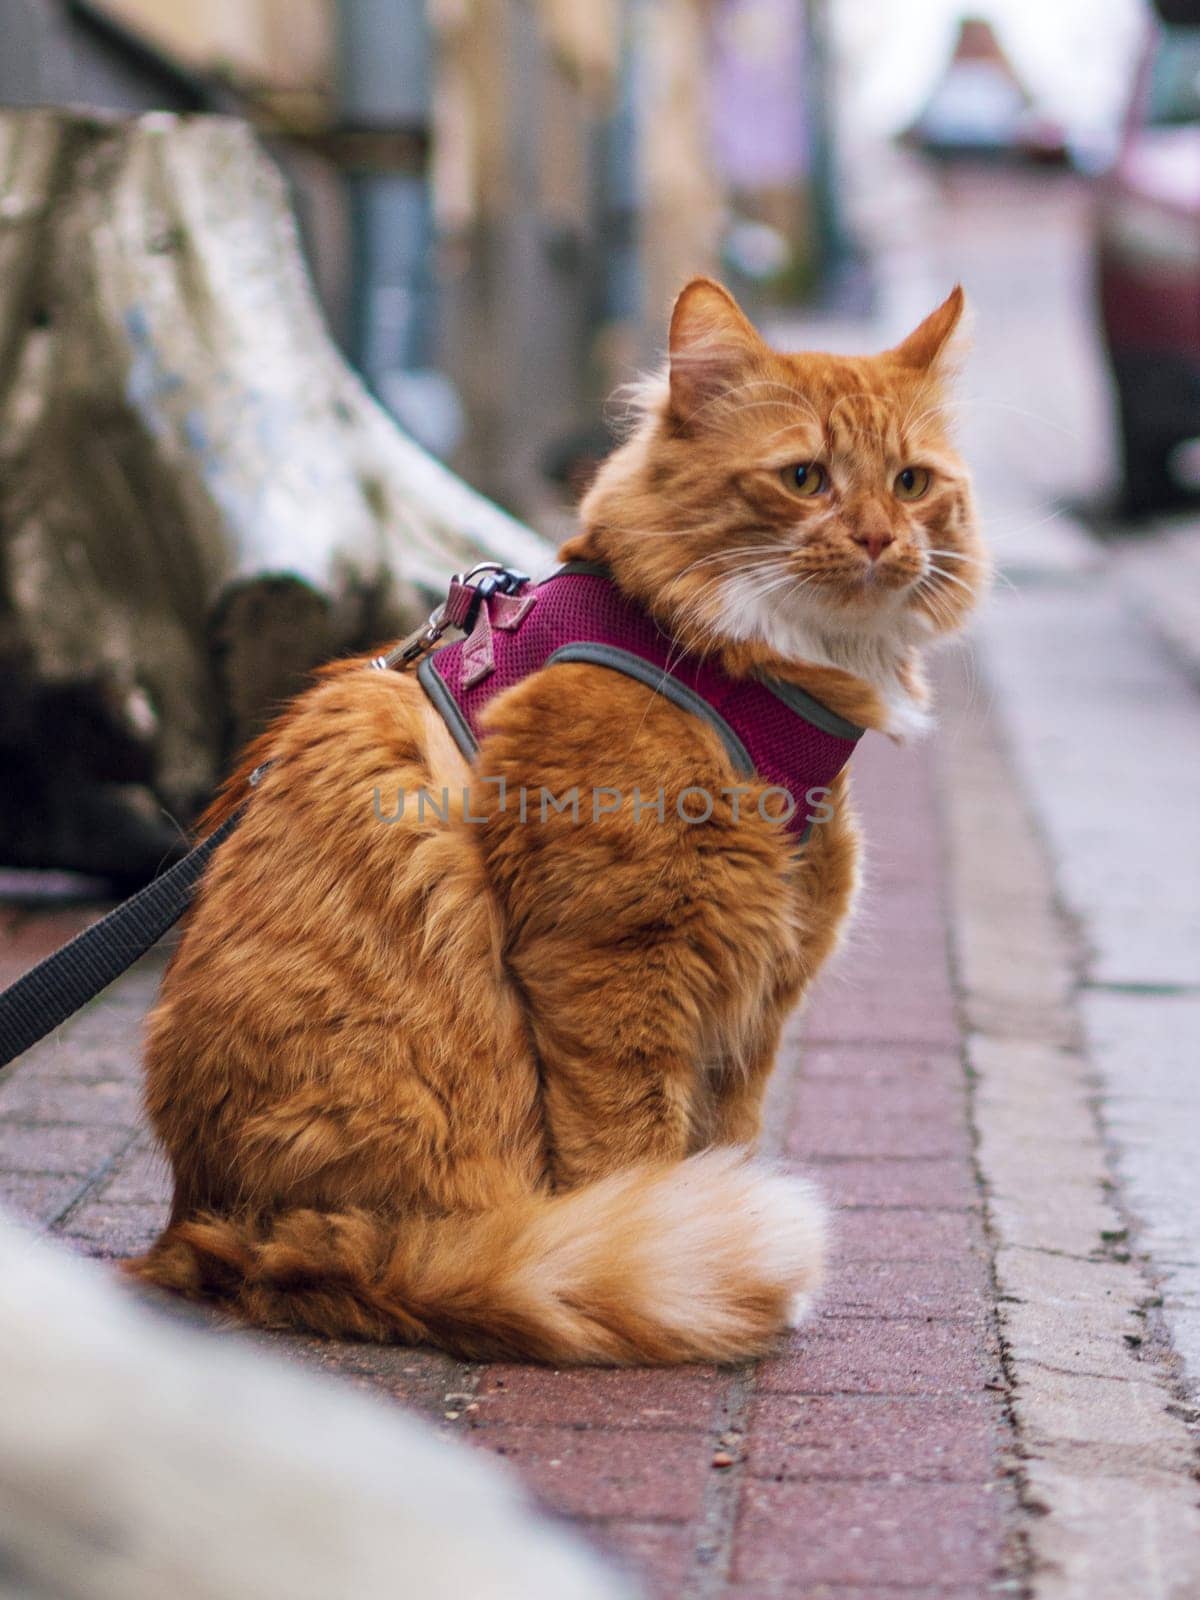 Big Orange Ginger Tom Cat on a City Street by Andre1ns